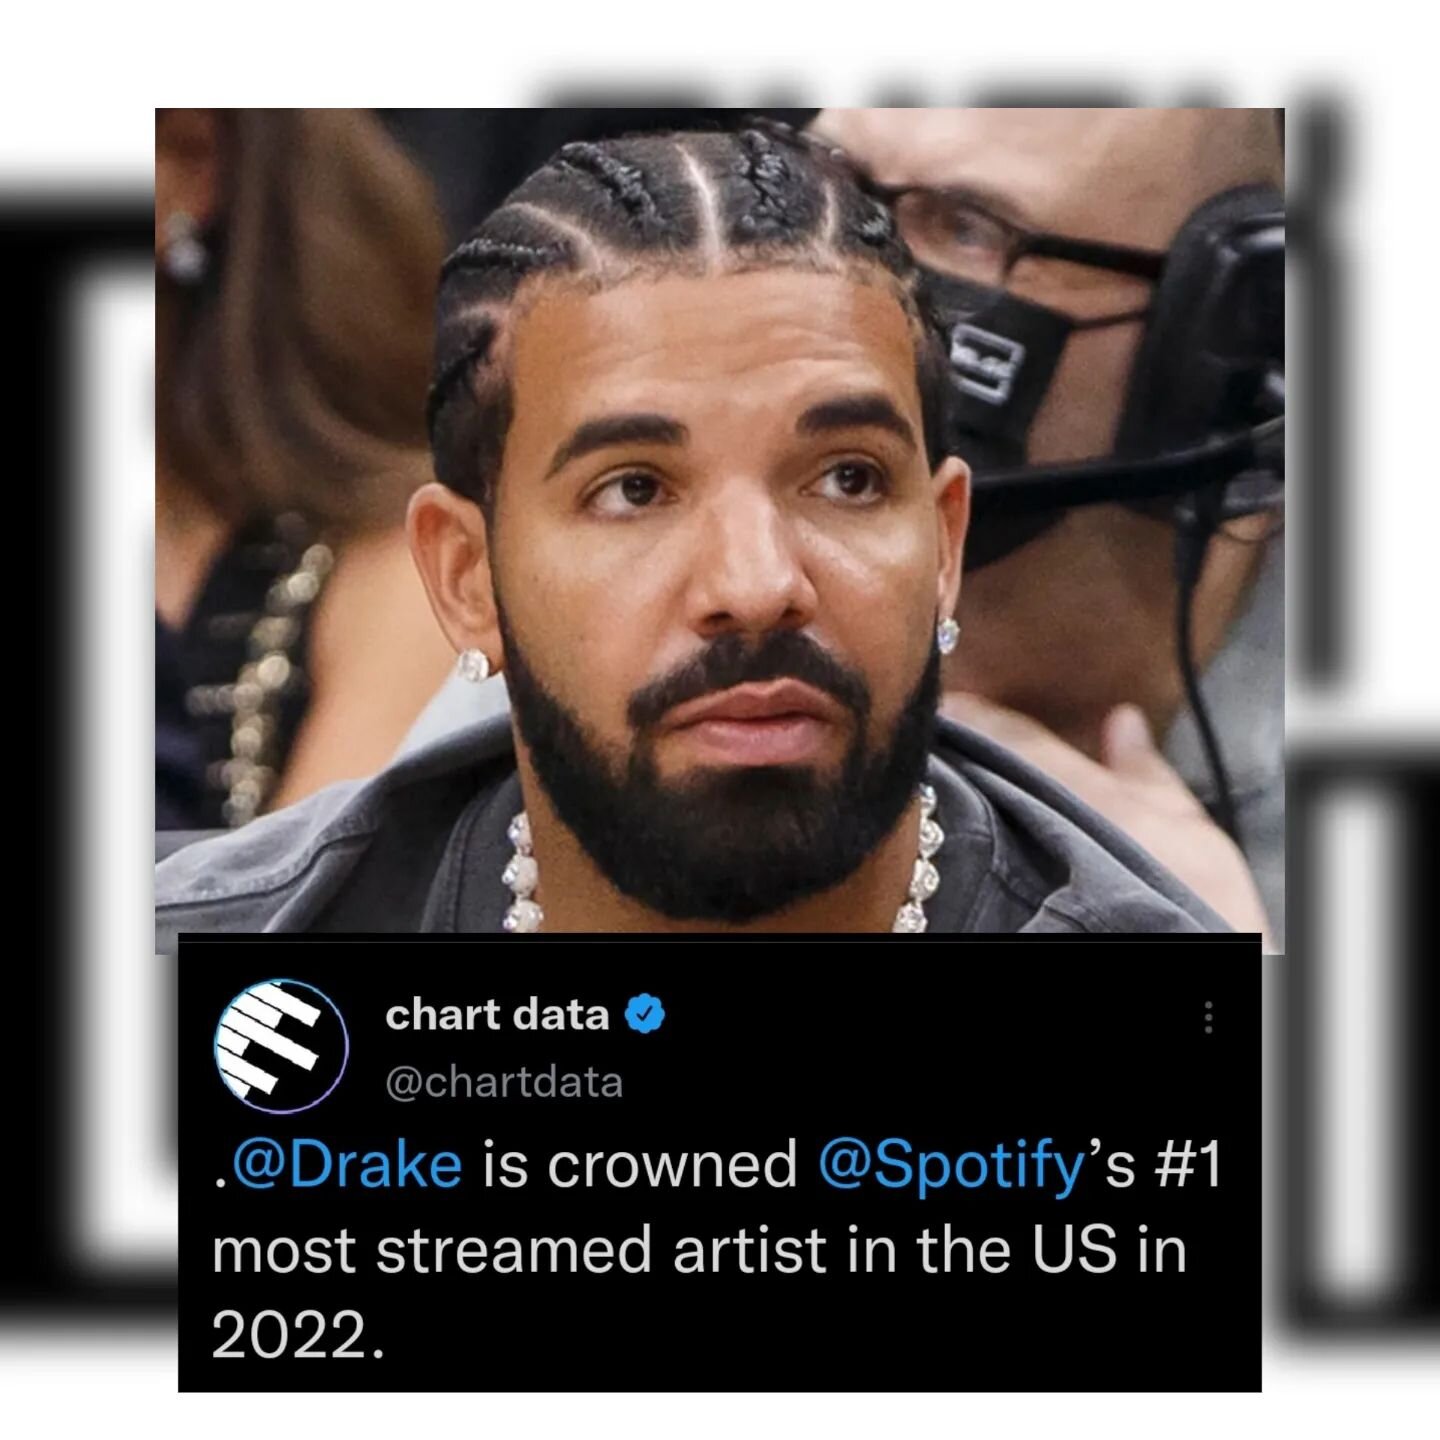 Well it looks like @champagnepapi has done it again! 
What #Drake🦉 albums did you listen to this year?